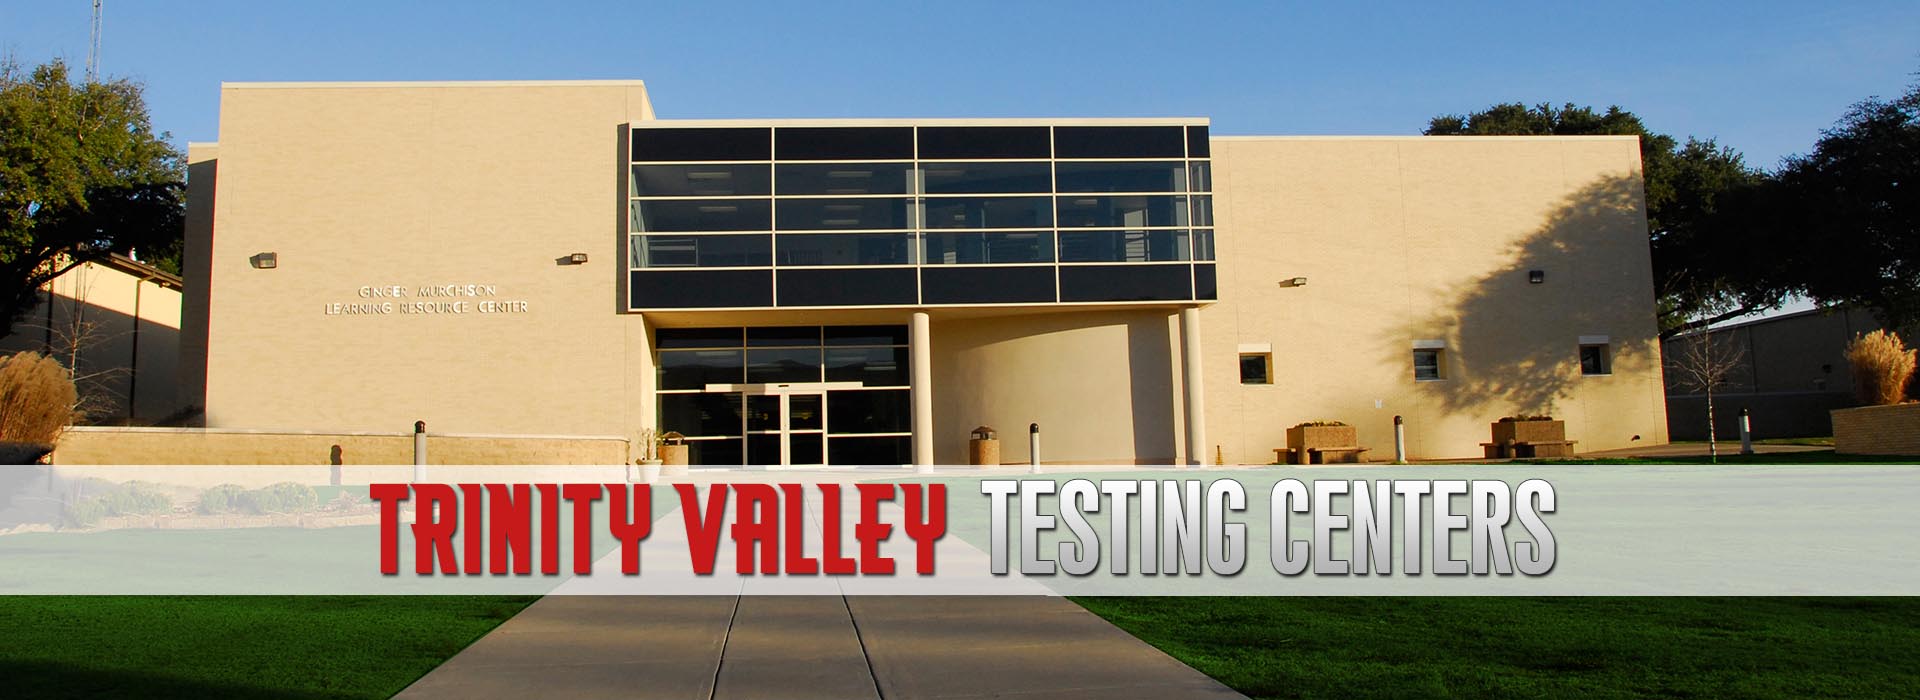 Trinity Valley Testing Centers - Picture of the Learning Resource Center, new home of the Athens Testing Center